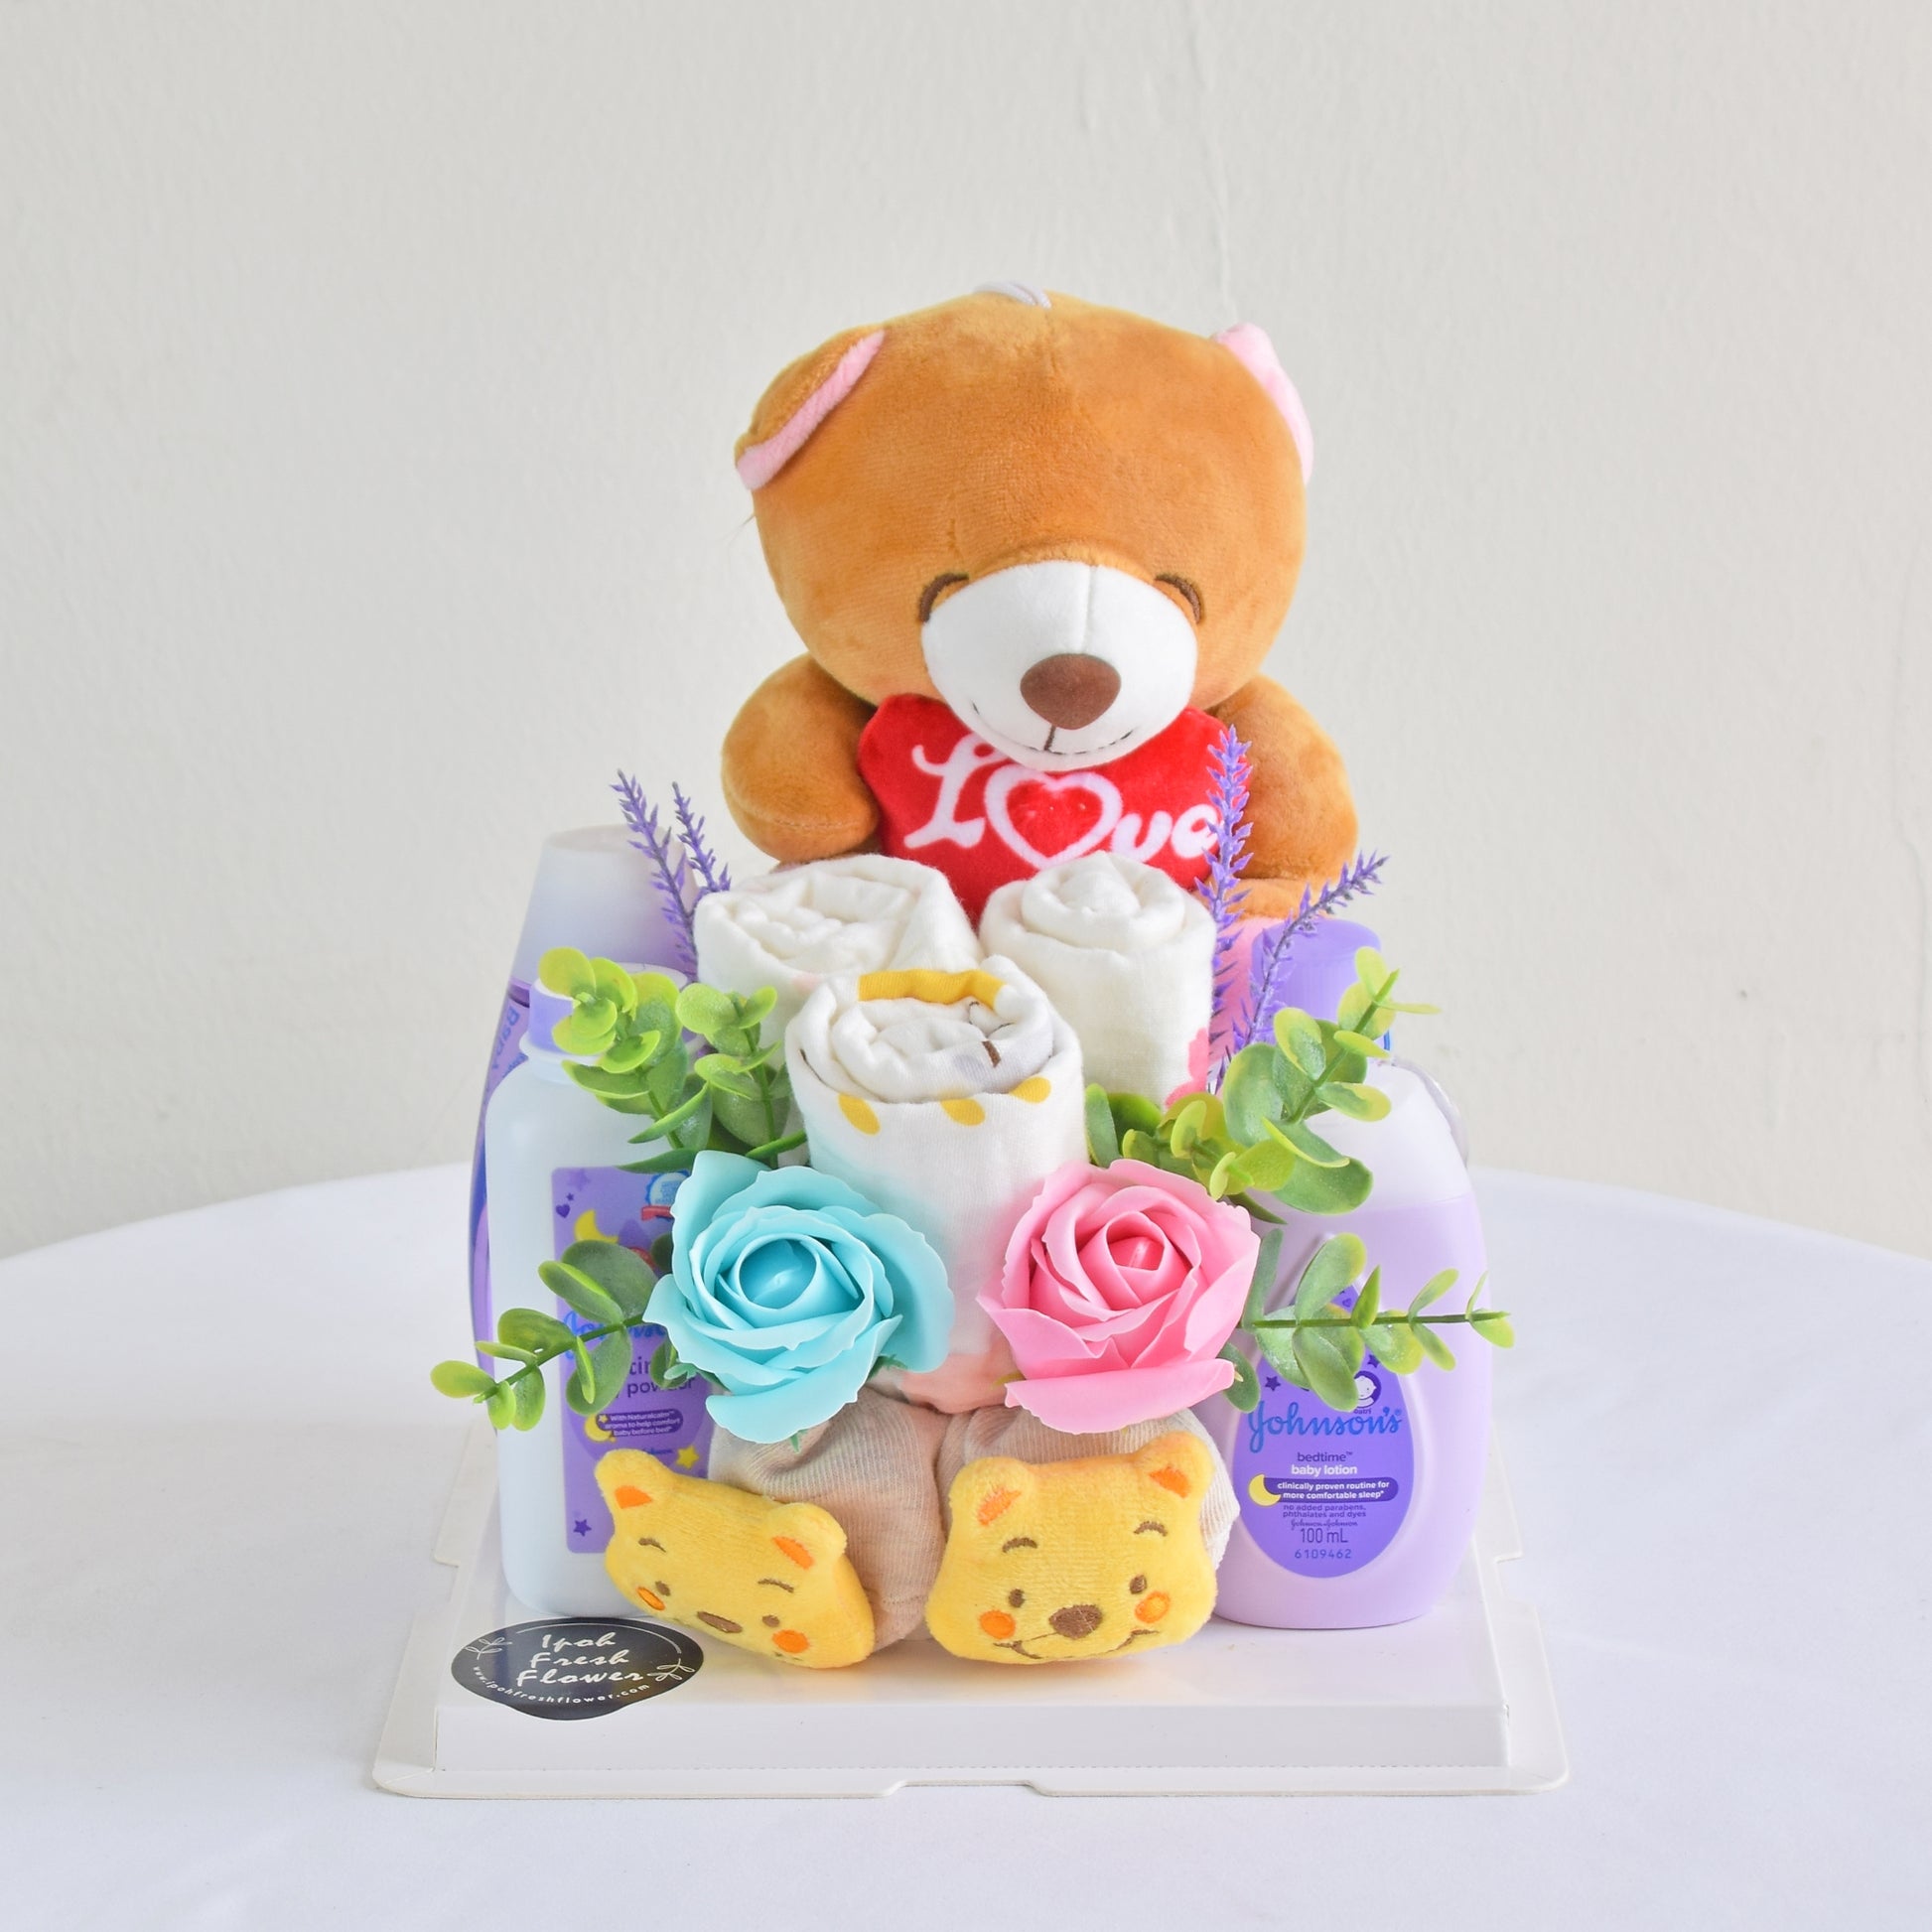 Baby bear gift box| New Born Baby Gift and Hamper Delivery